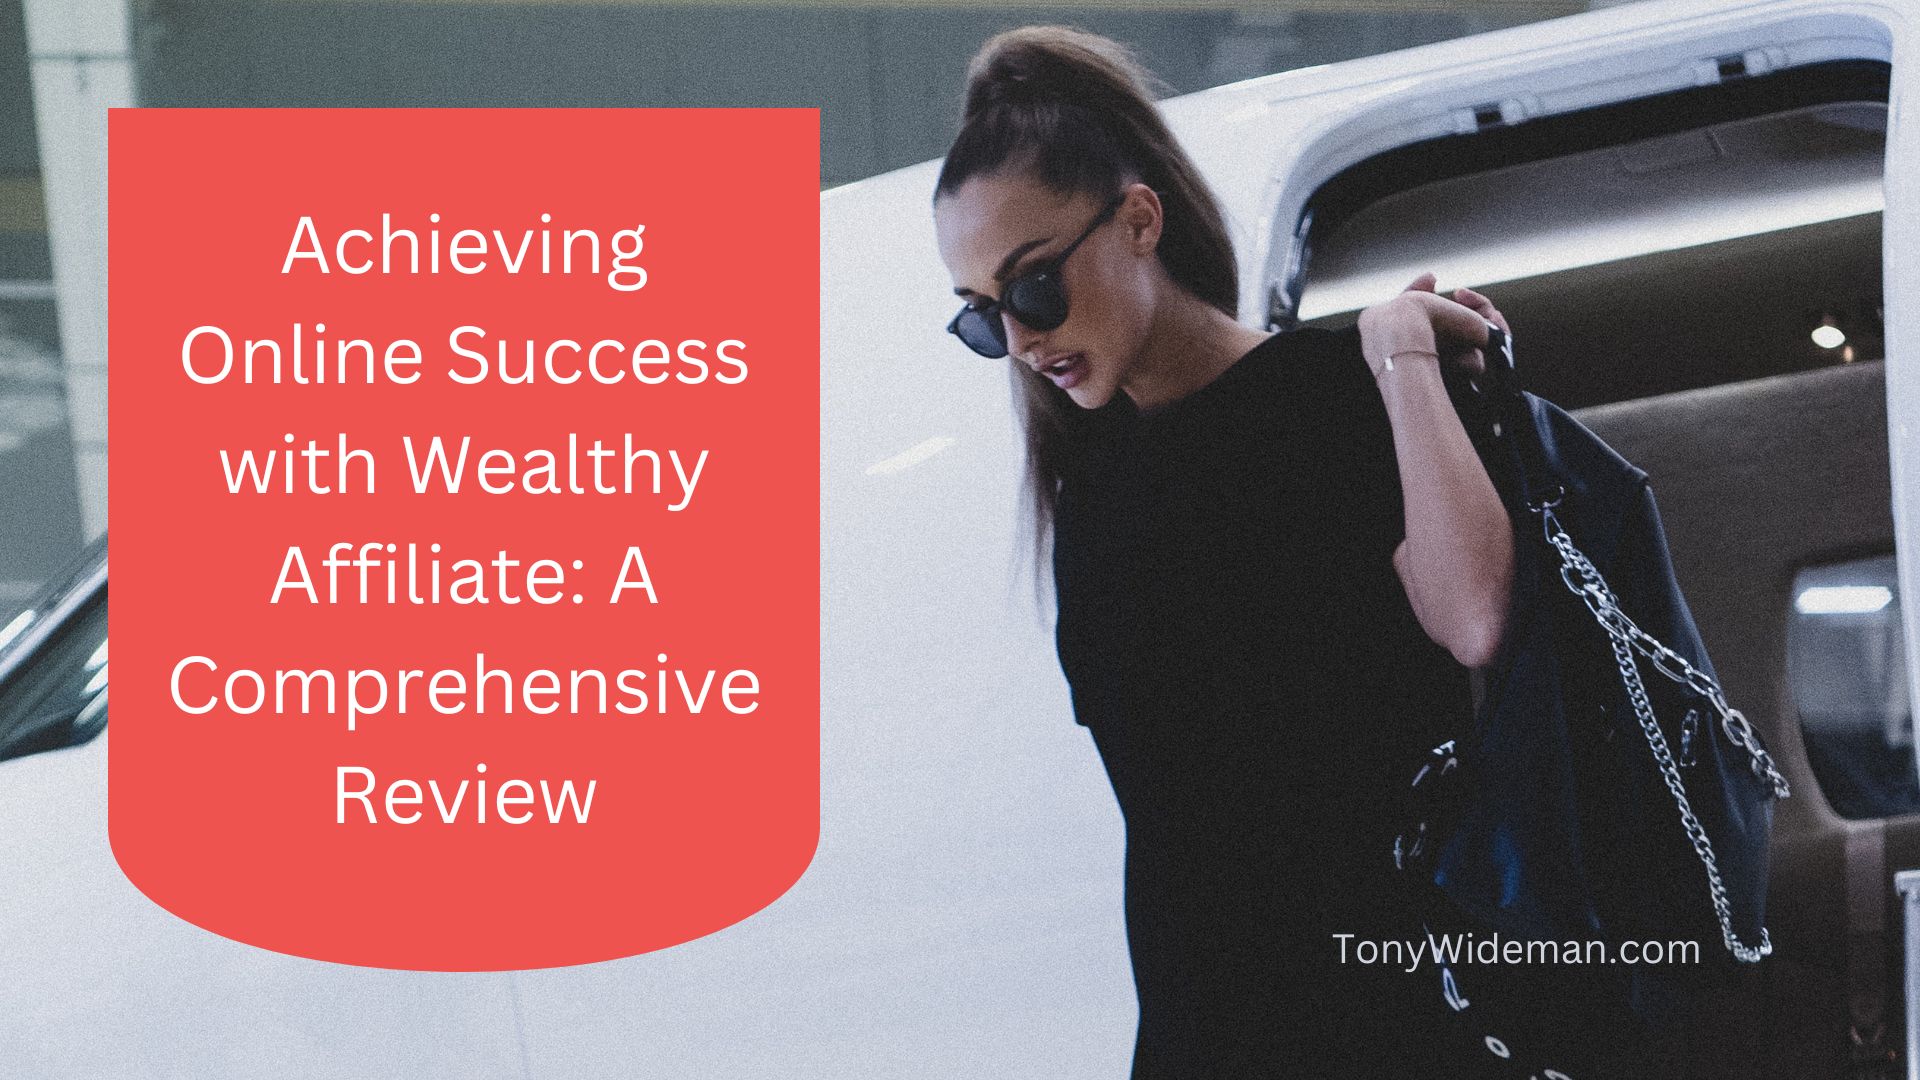 Achieving Online Success with Wealthy Affiliate: A Comprehensive Review